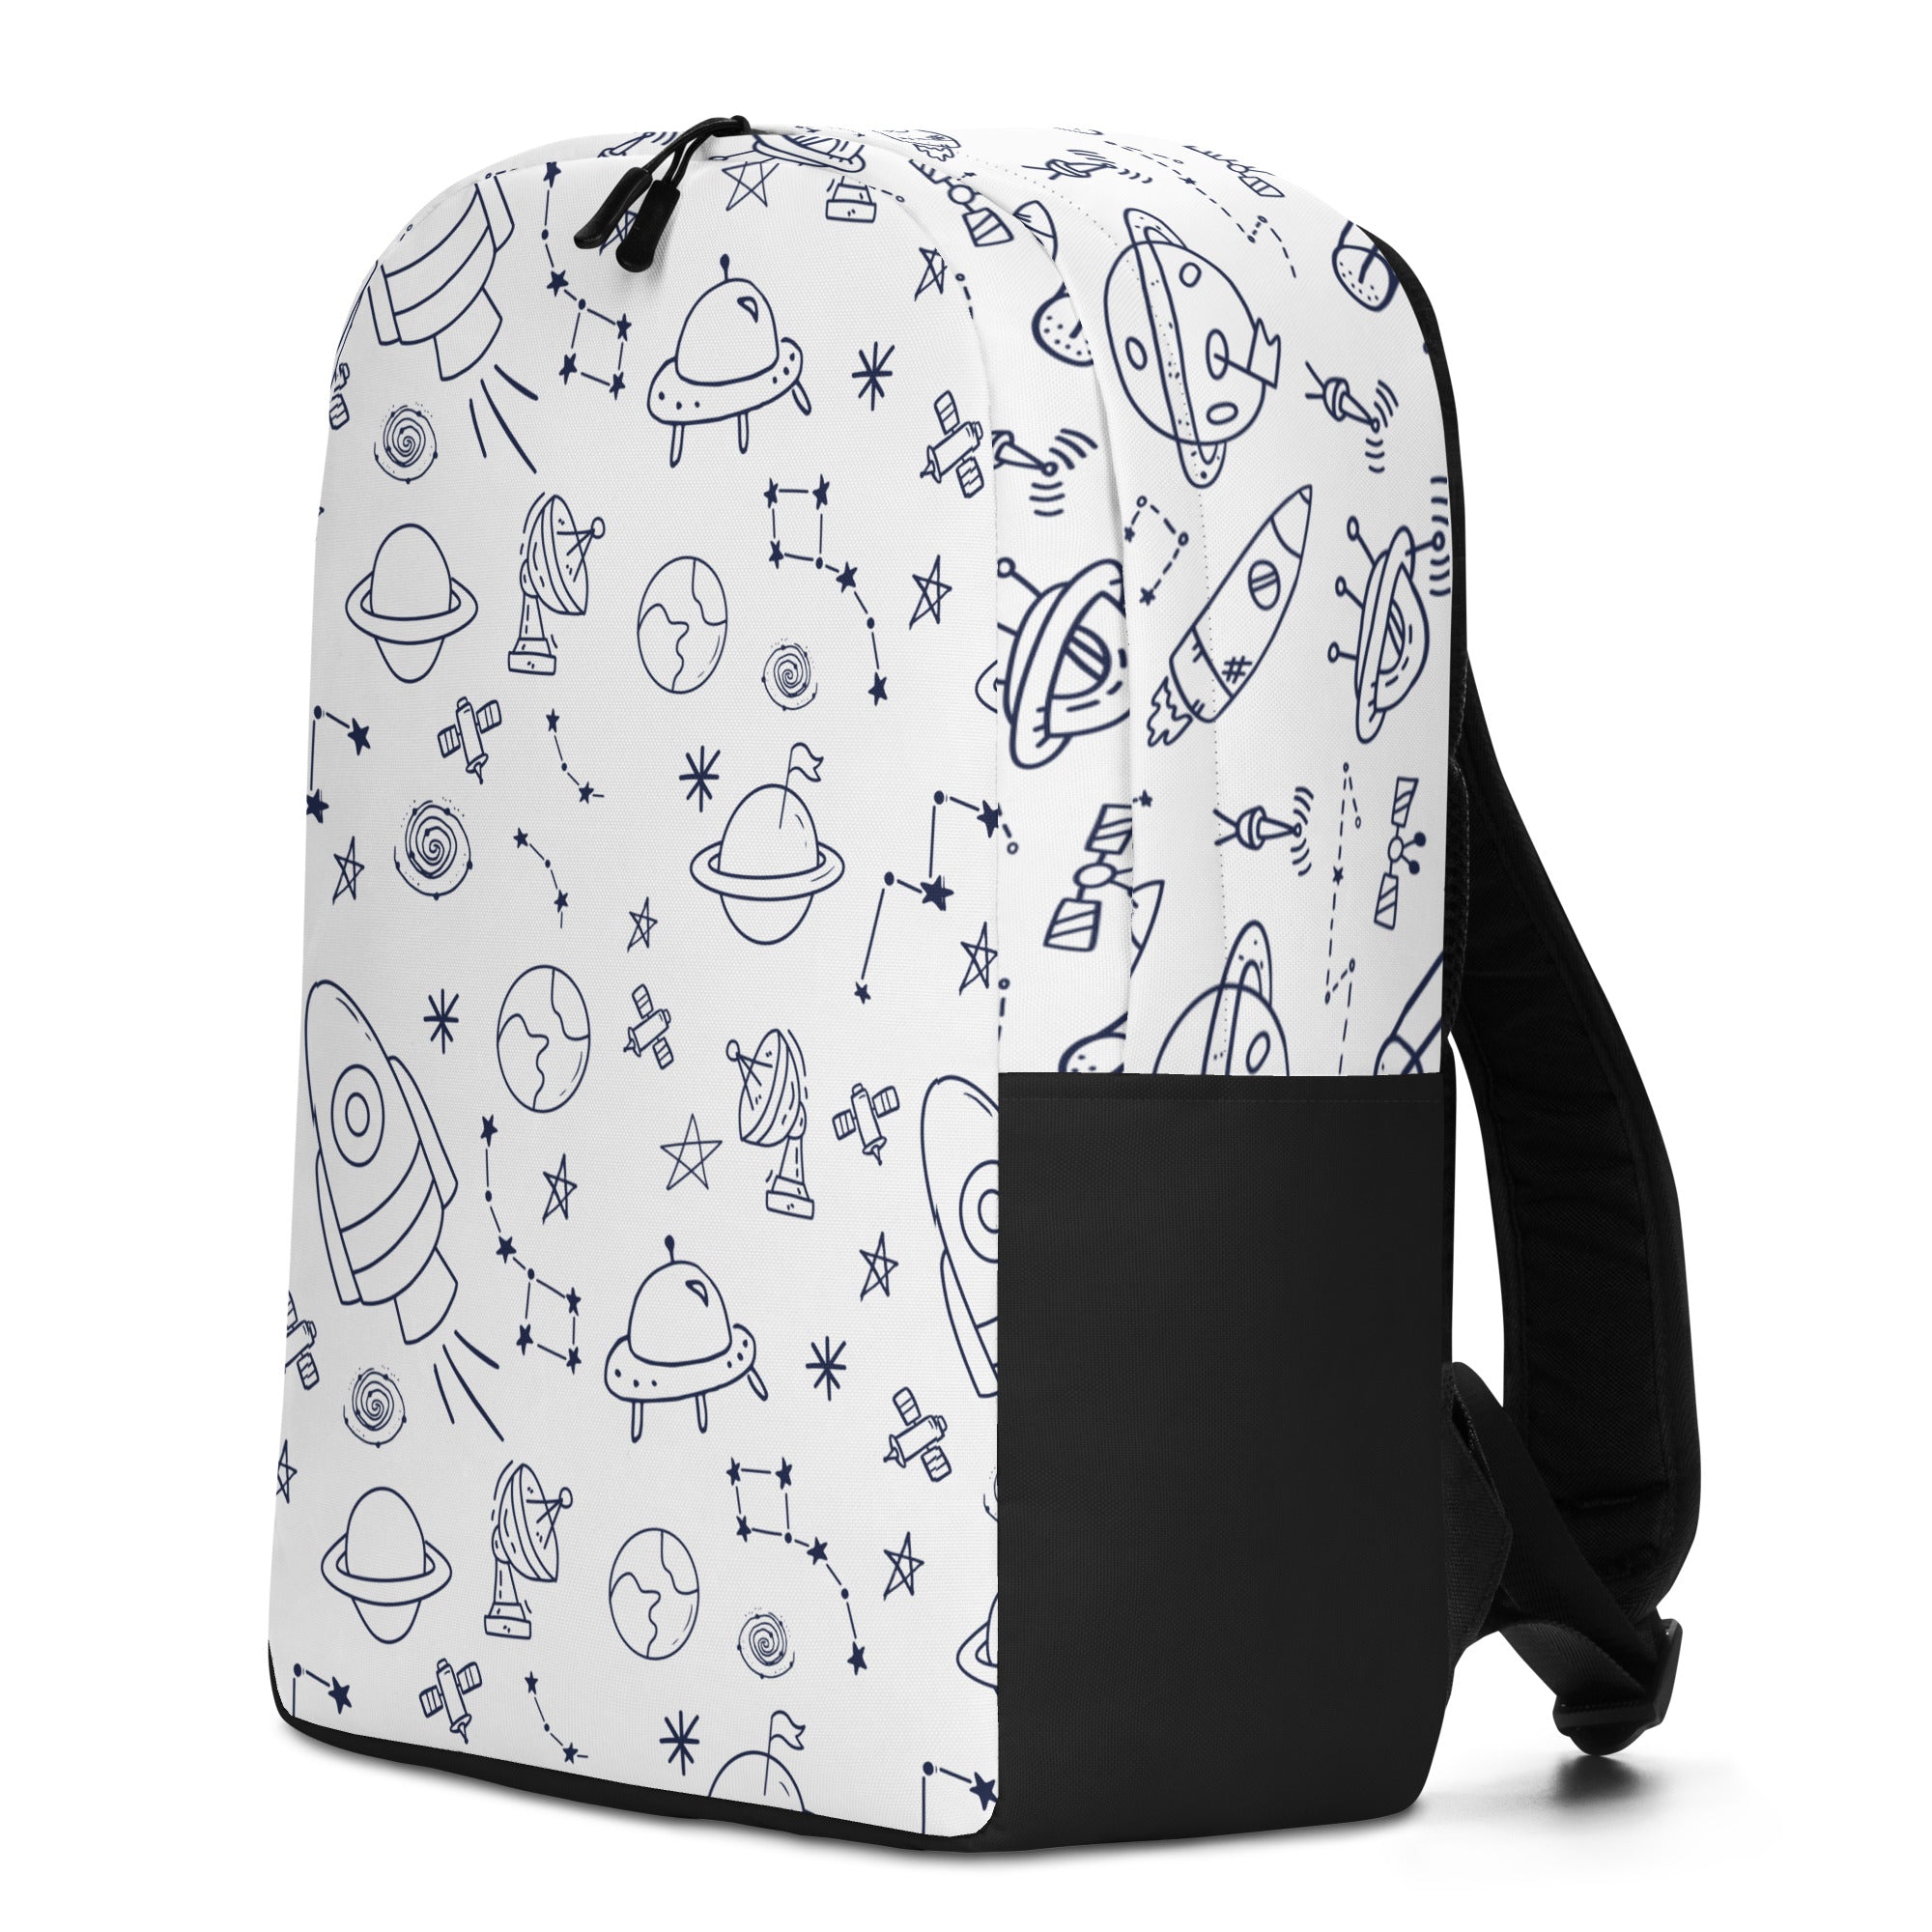 Kids backpack with rocket ships and planets